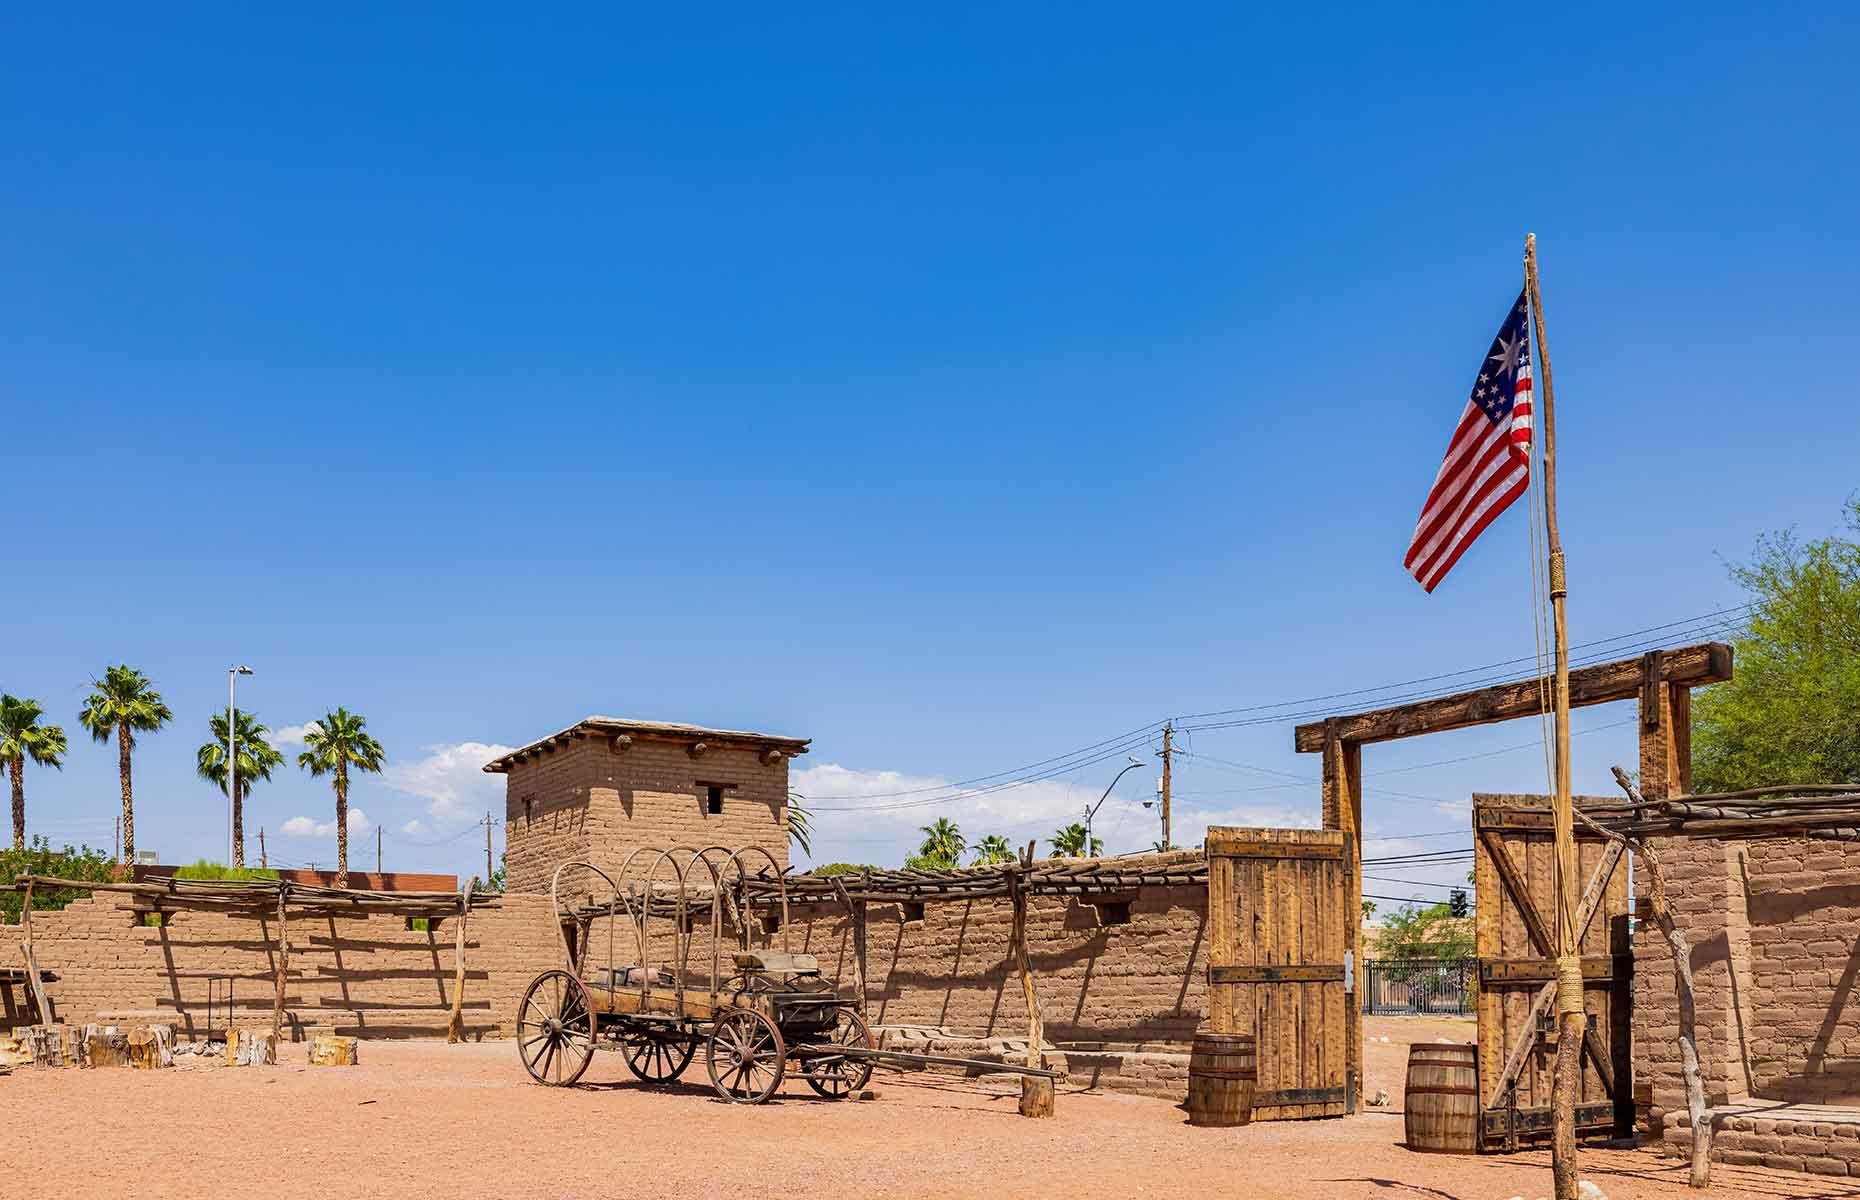 <p>Although partially reconstructed, you can still see sections of the original <a href="http://parks.nv.gov/parks/old-las-vegas-mormon-fort">Old Mormon Fort</a> that was built by Mormon missionaries in 1855. The 150 square foot (14sqm) outpost served as a station for travelers, while the rest of the site – in startling contrast to its downtown Las Vegas location – includes reconstructions of the creek the fort sat along, an adobe building, historic wagons and a ranch house. You'll feel as if you’ve stepped back in time, and both the fort and the visitor center contain artifacts found at the 19th-century site.</p>  <p><a href="https://www.loveexploring.com/galleries/99342/sin-city-secrets-the-incredible-story-of-las-vegas?page=1"><strong>Learn more about the incredible story of Las Vegas</strong></a></p>